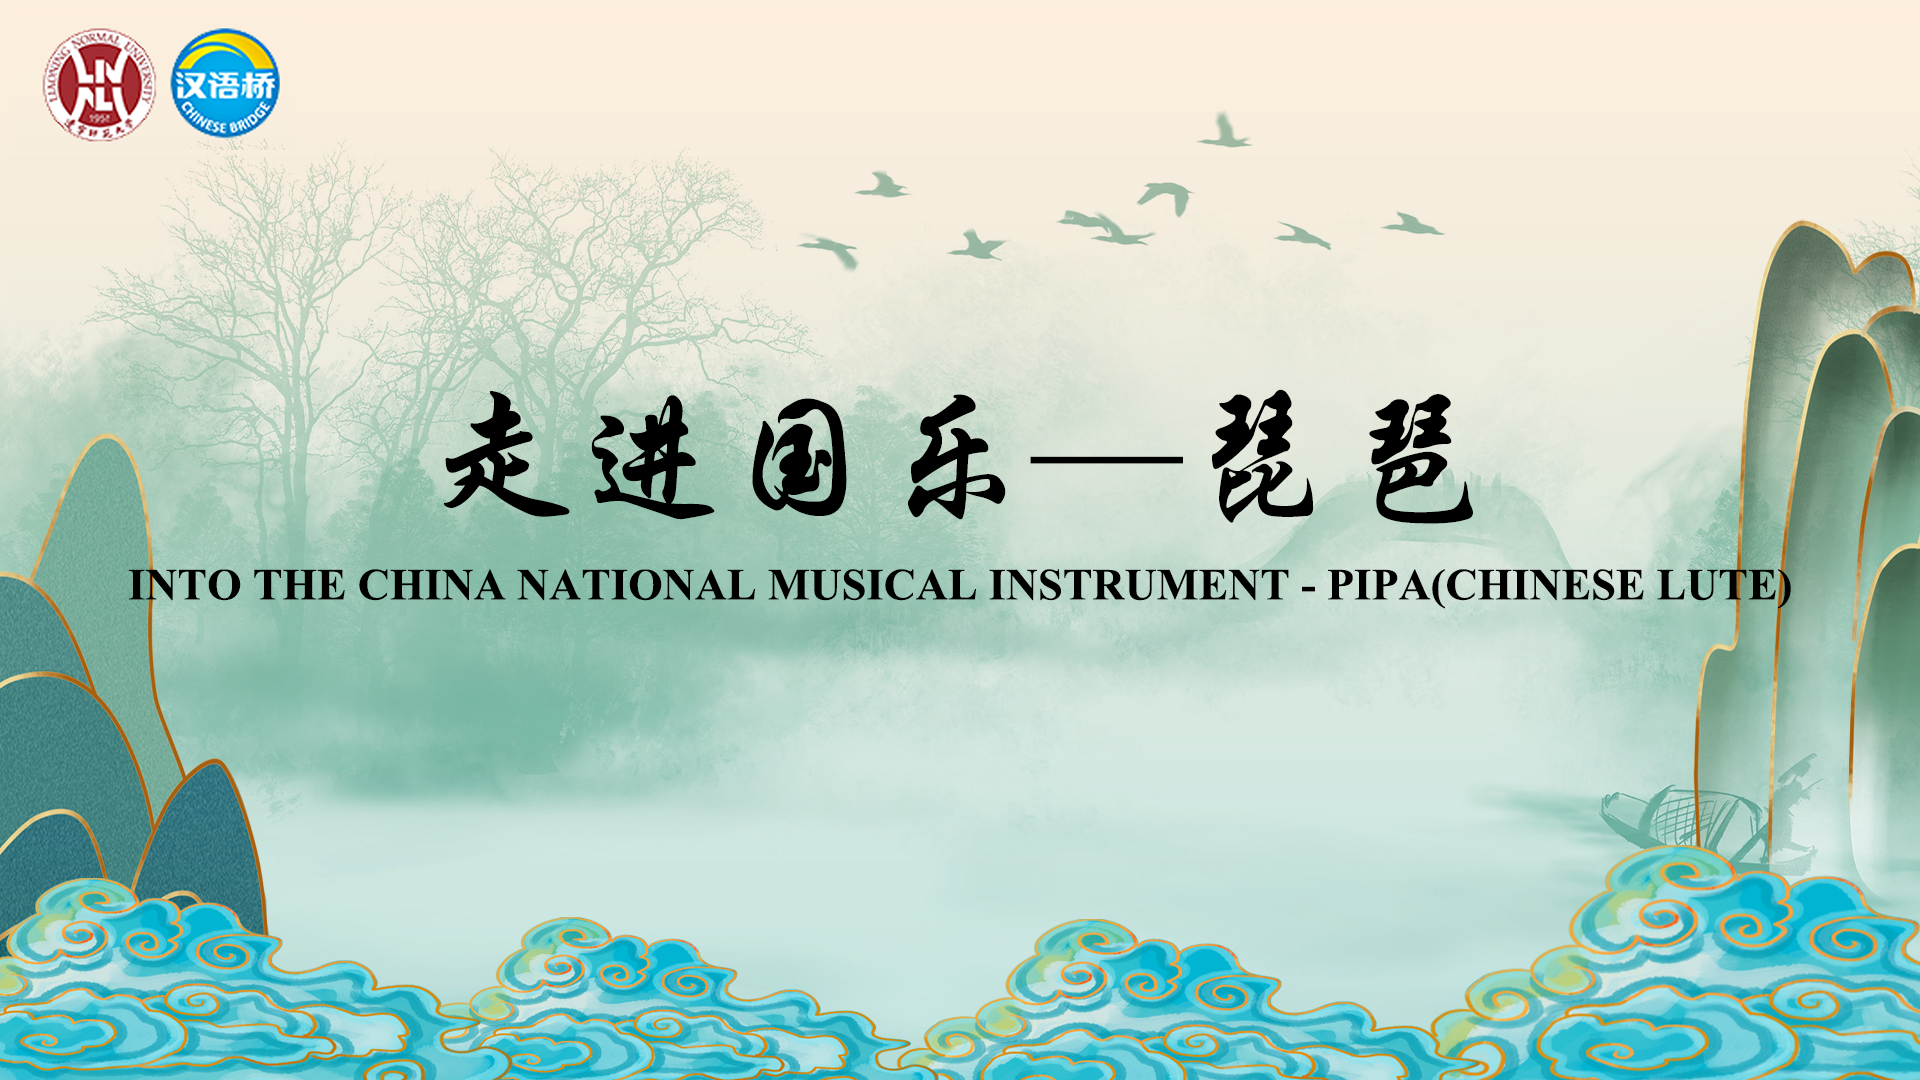 Into the China National Musical Instrument - Pipa(Chinese Lute)